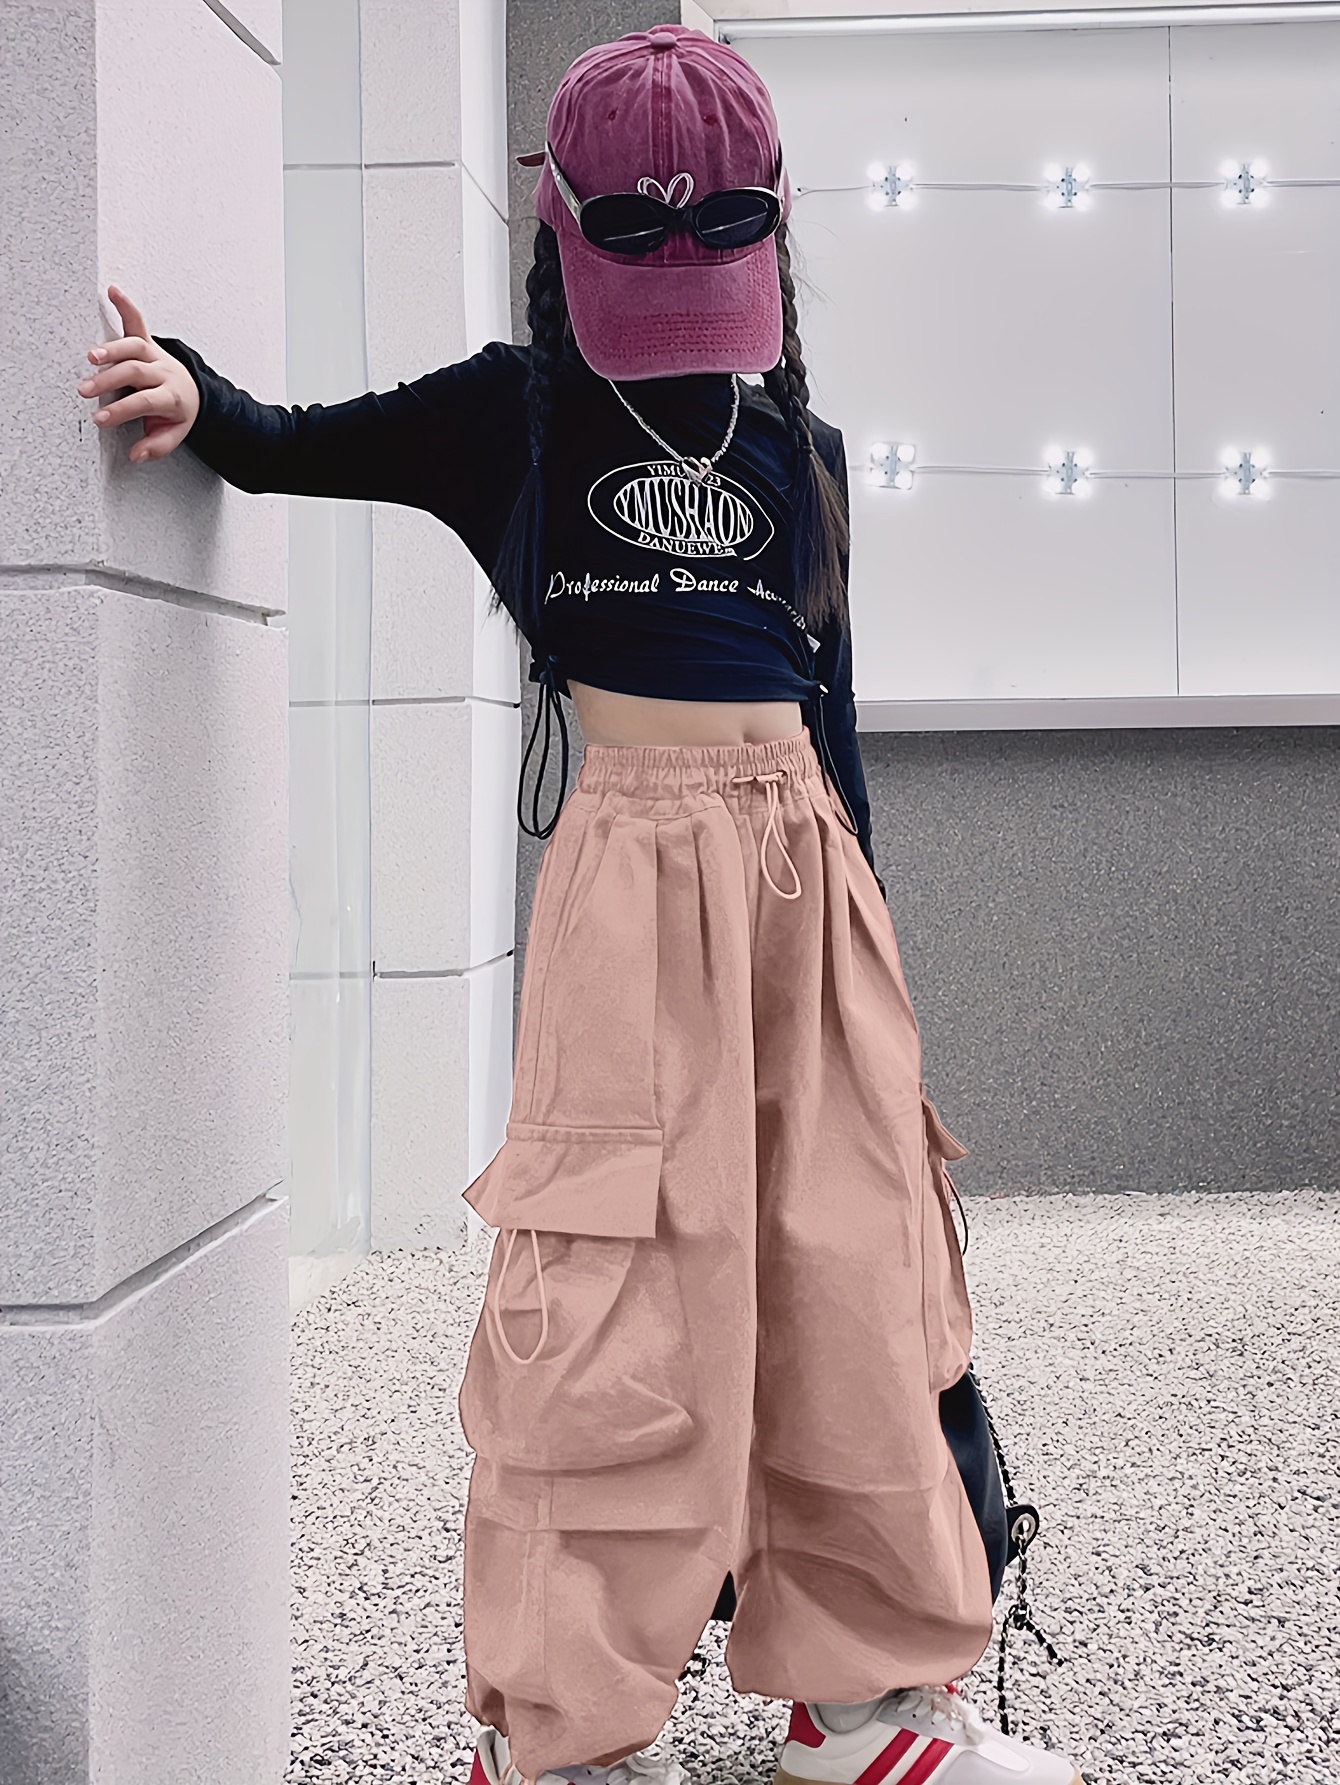 Young Girls Jeans Fashion Loose Wide Leg Trousers for Kids Spring School  Children Clothes 6 8 10 12 13 Years Korean Dance Pants - AliExpress